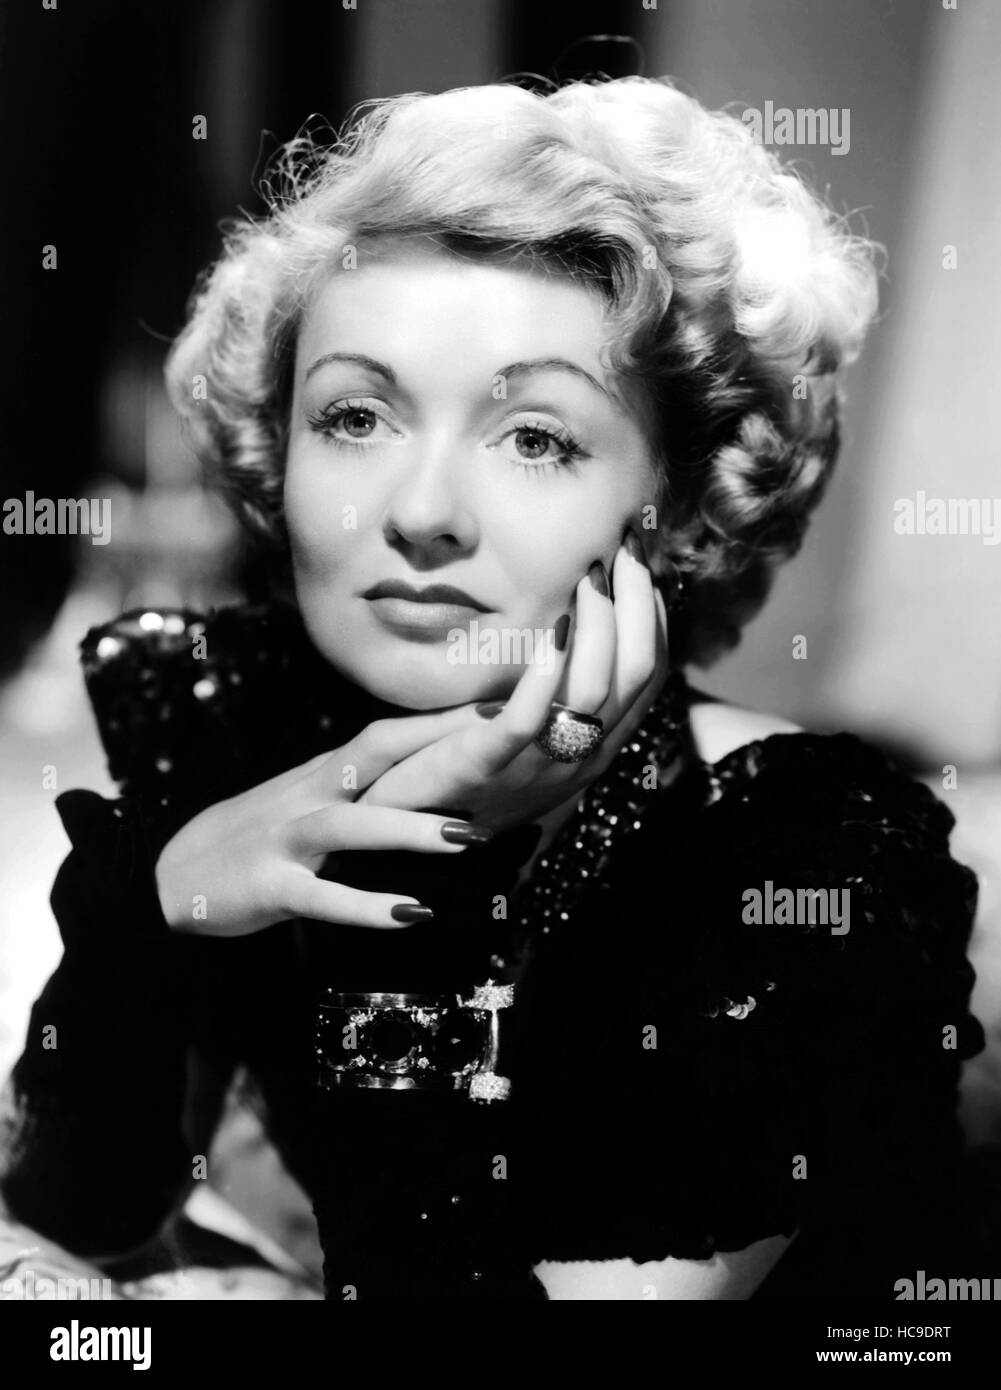 TWO-FACED WOMAN, Constance Bennett, 1941 Stock Photo - Alamy